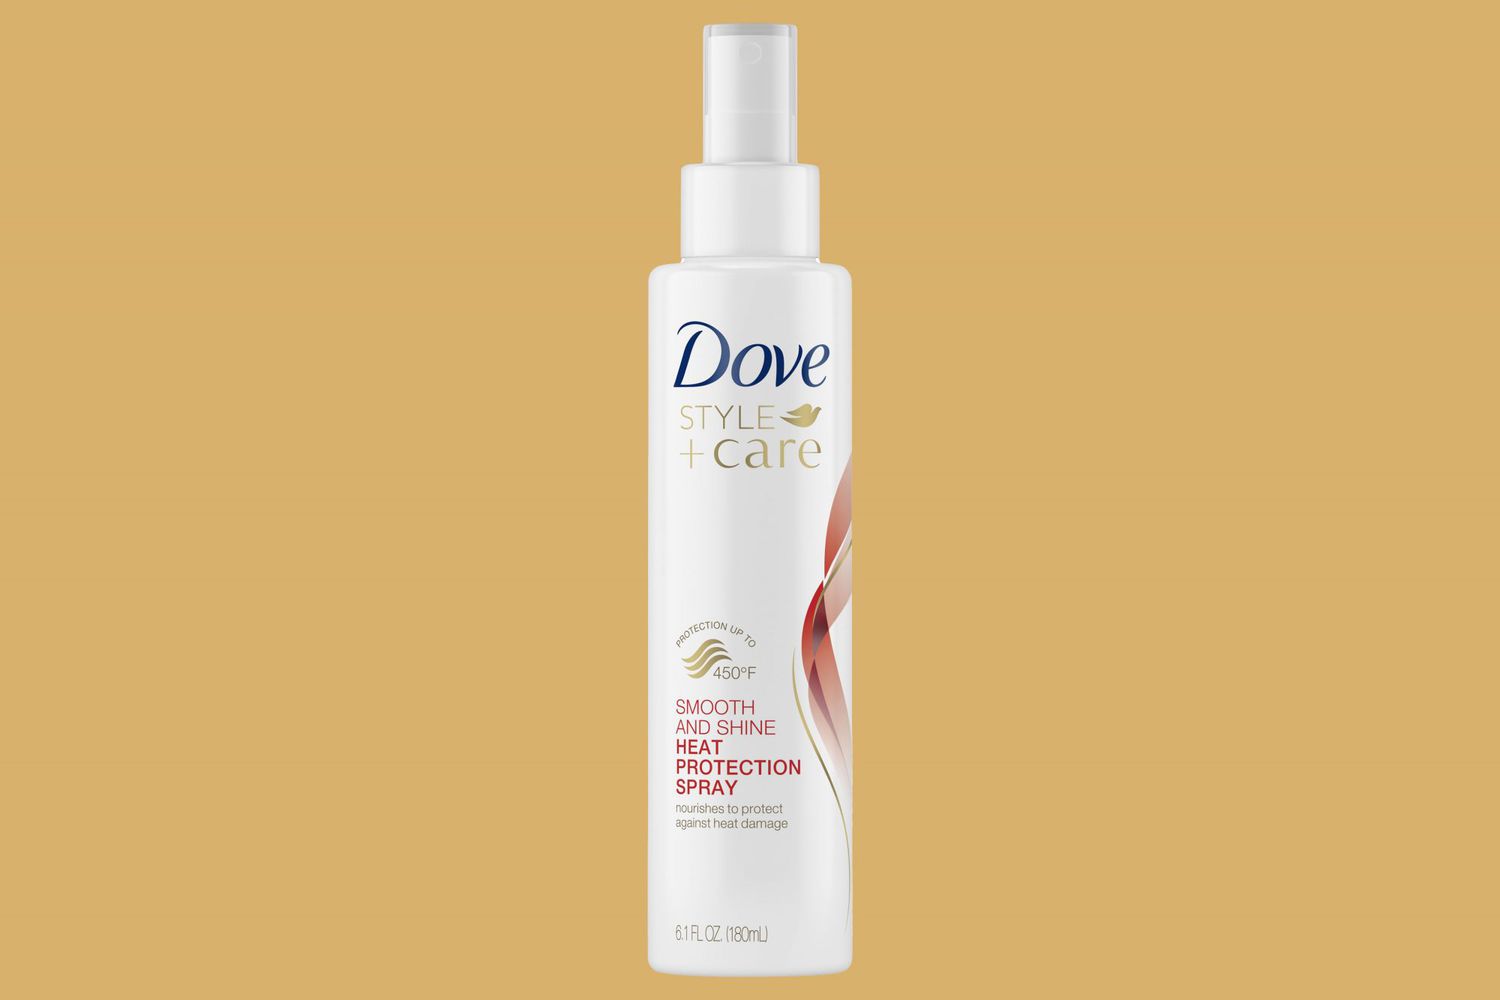 Dove Style+Care Smooth & Shine Heat-Protectant Spray